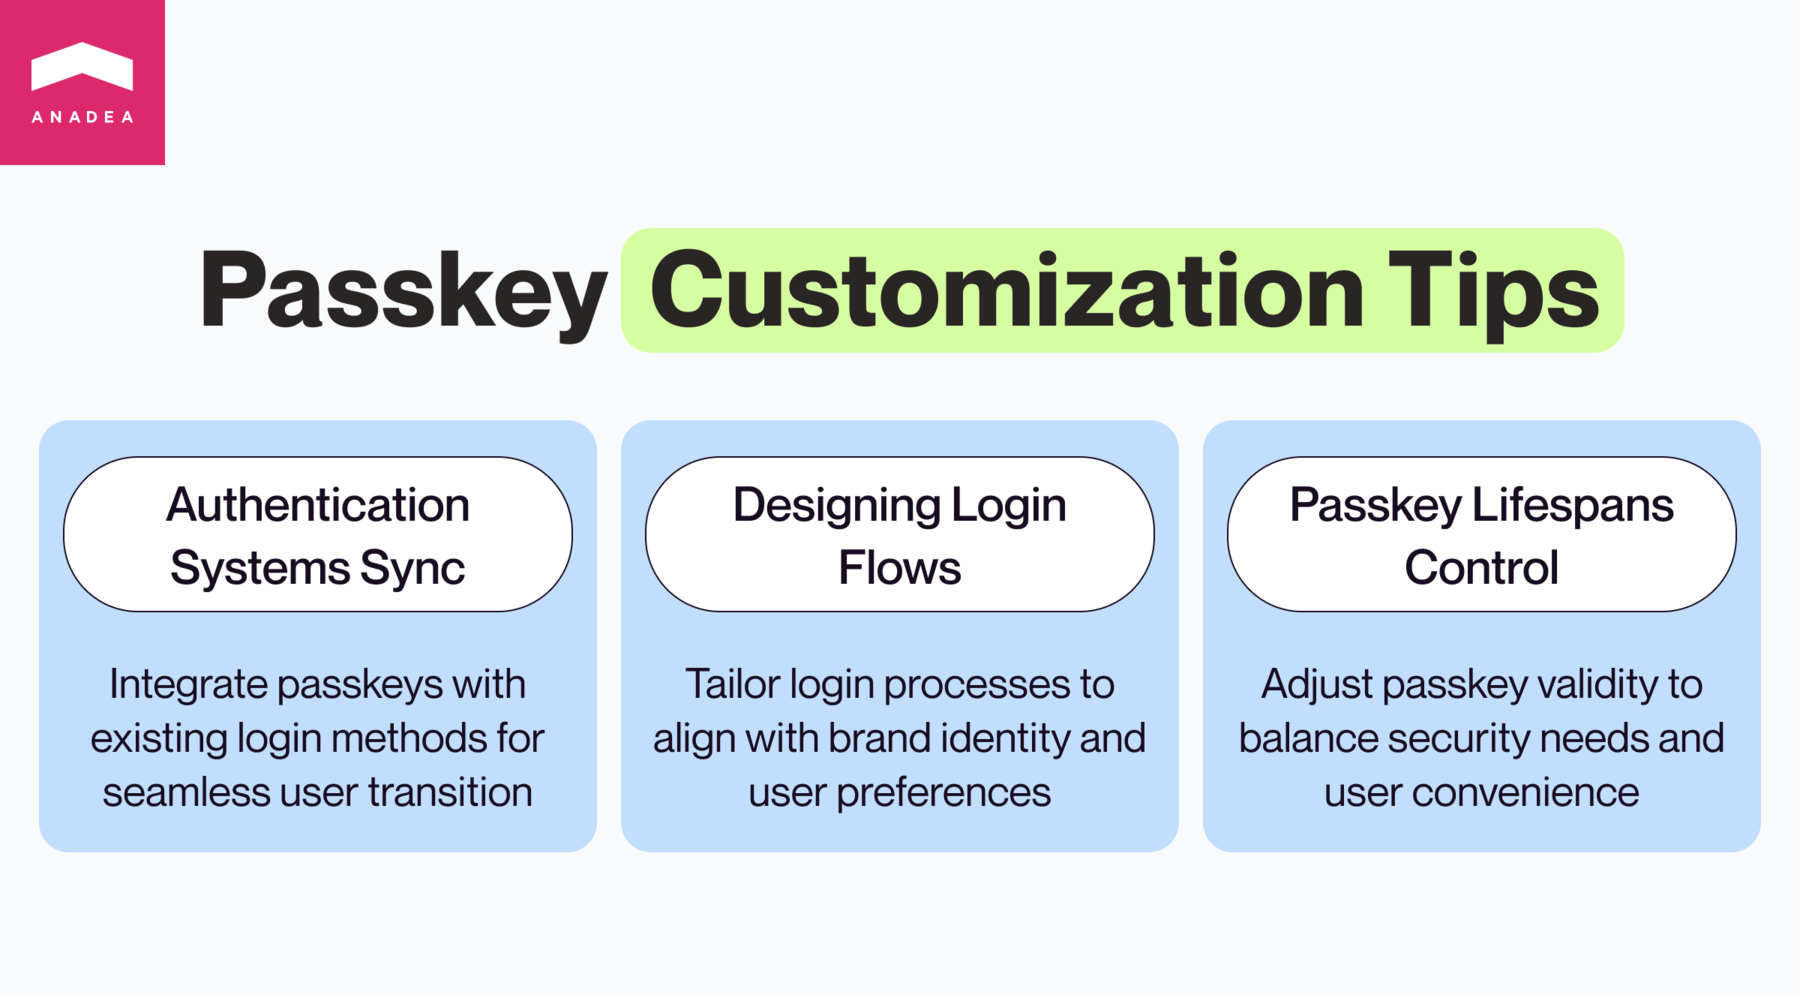 How to customize passkey